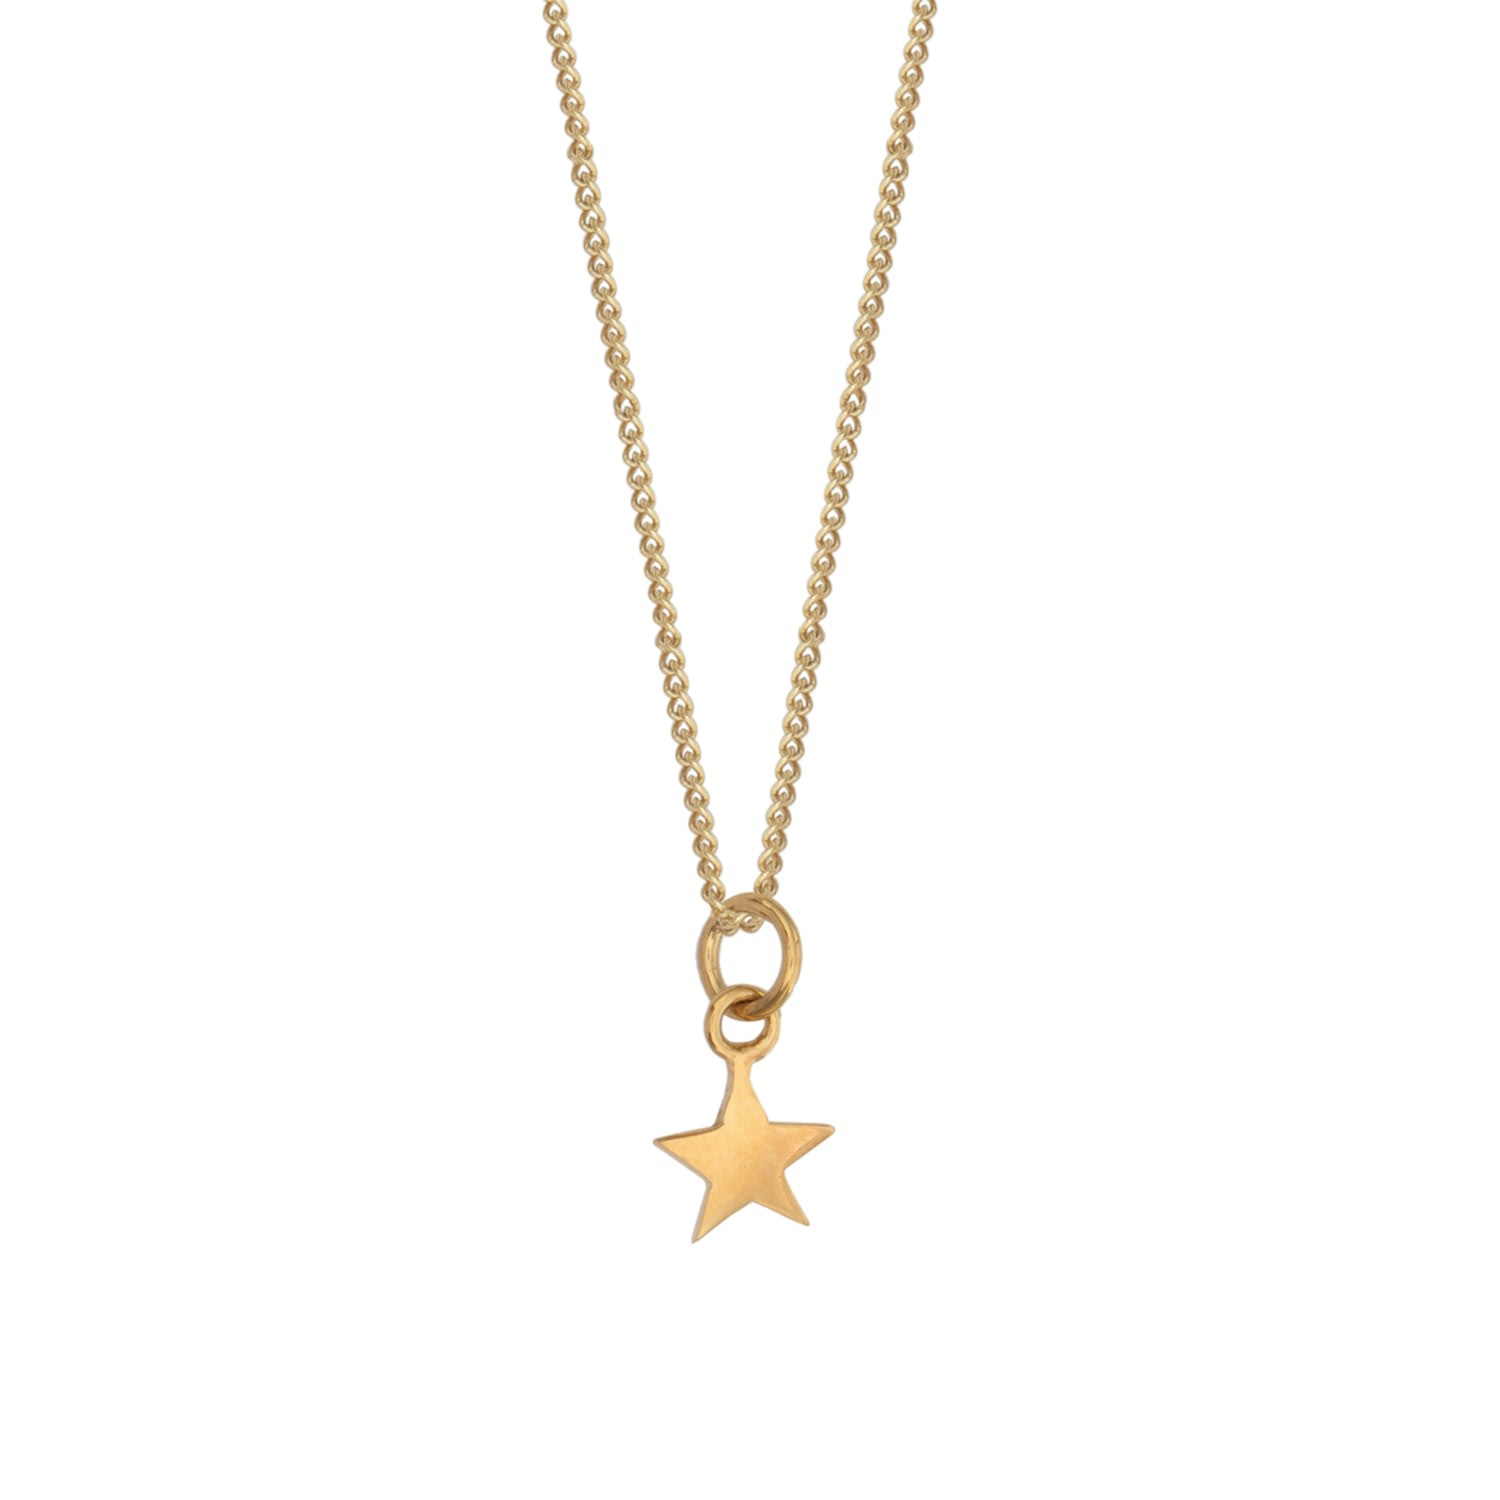 Lime Tree Design Women's Star Charm Necklace 14ct Solid Gold